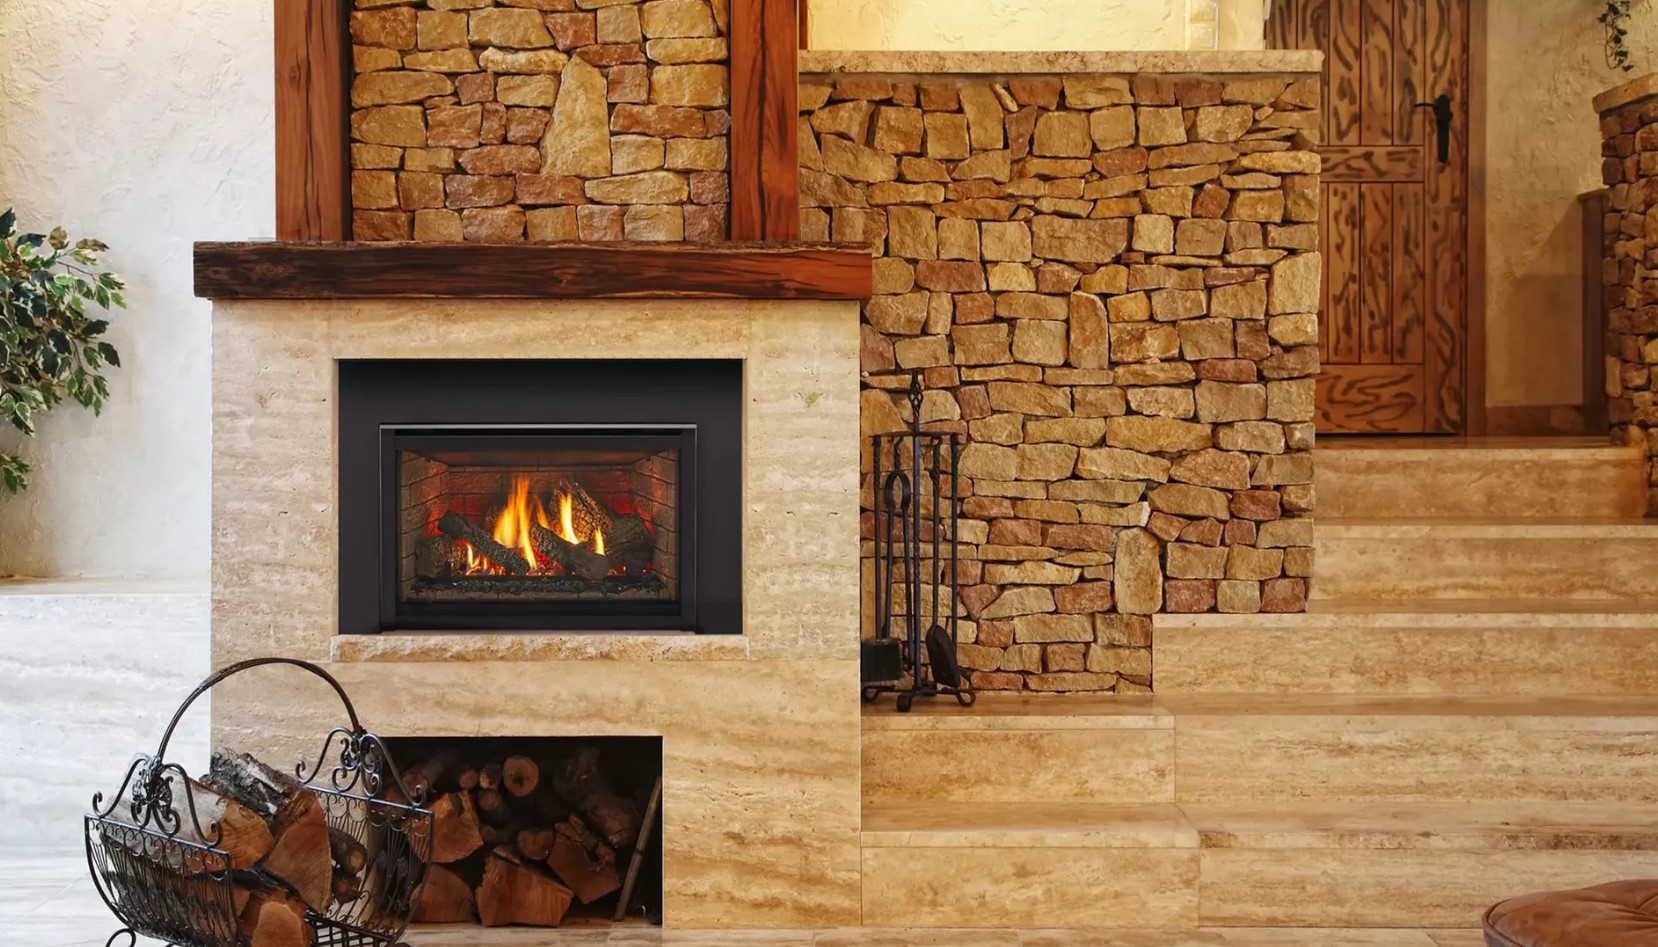 Gas Fireplace Inserts Cost: What You Need to Know (Complete Guide)